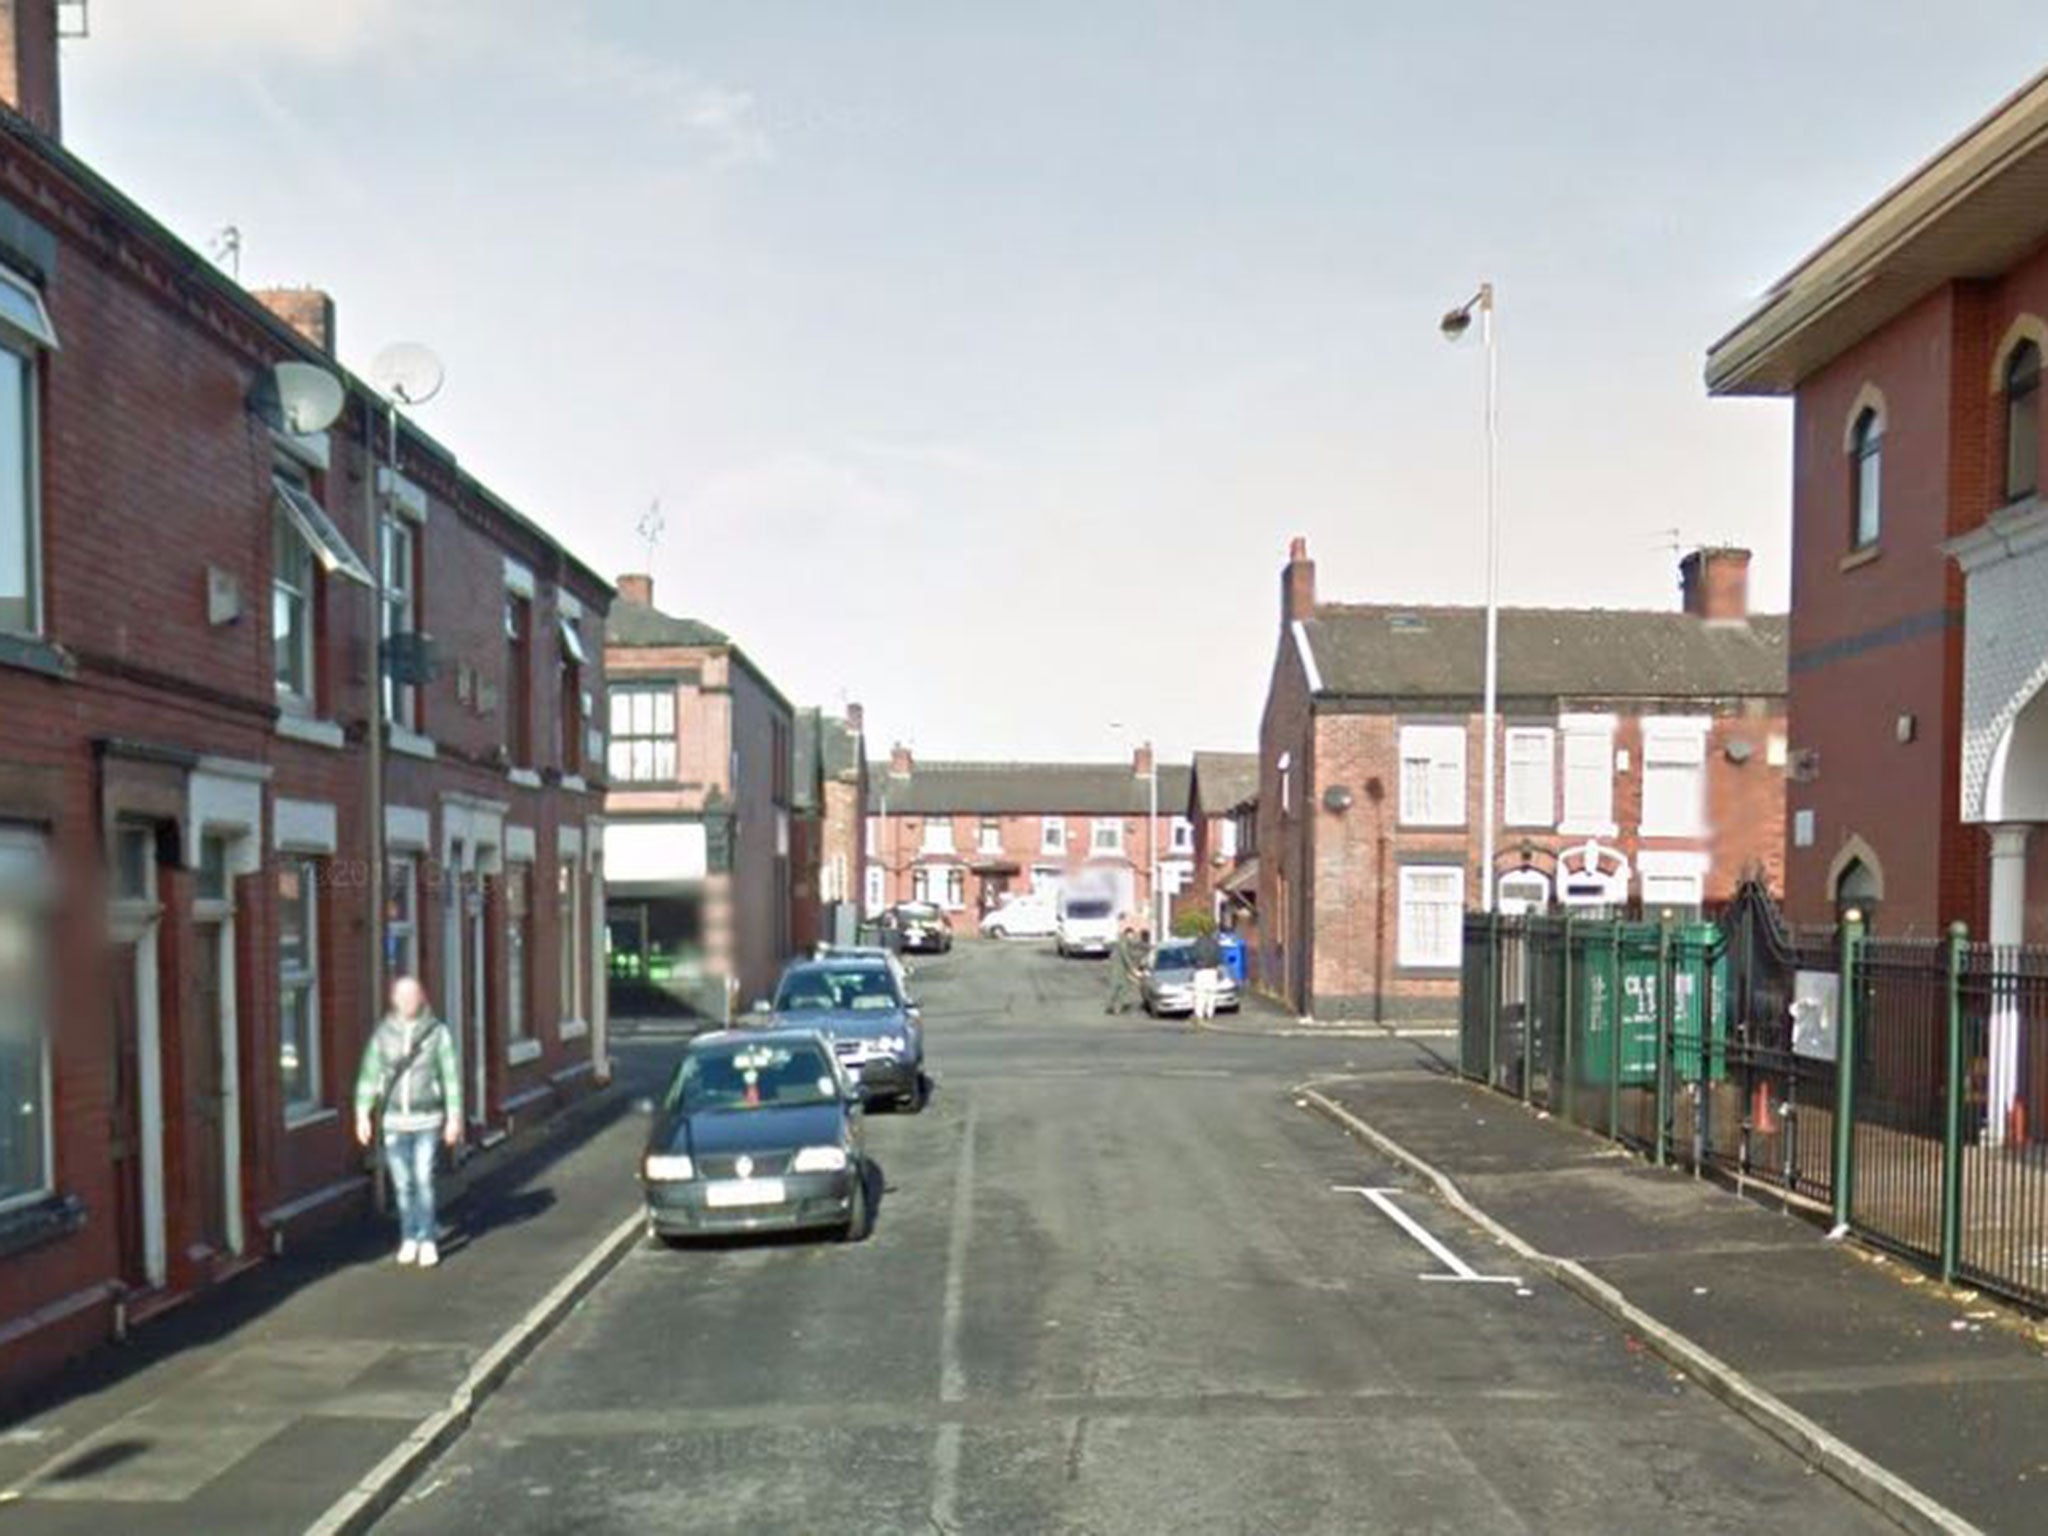 The collision occurred on Moss Street West at the junction with Mowbray Street in Ashton-under-Lyne, Greater Manchester.